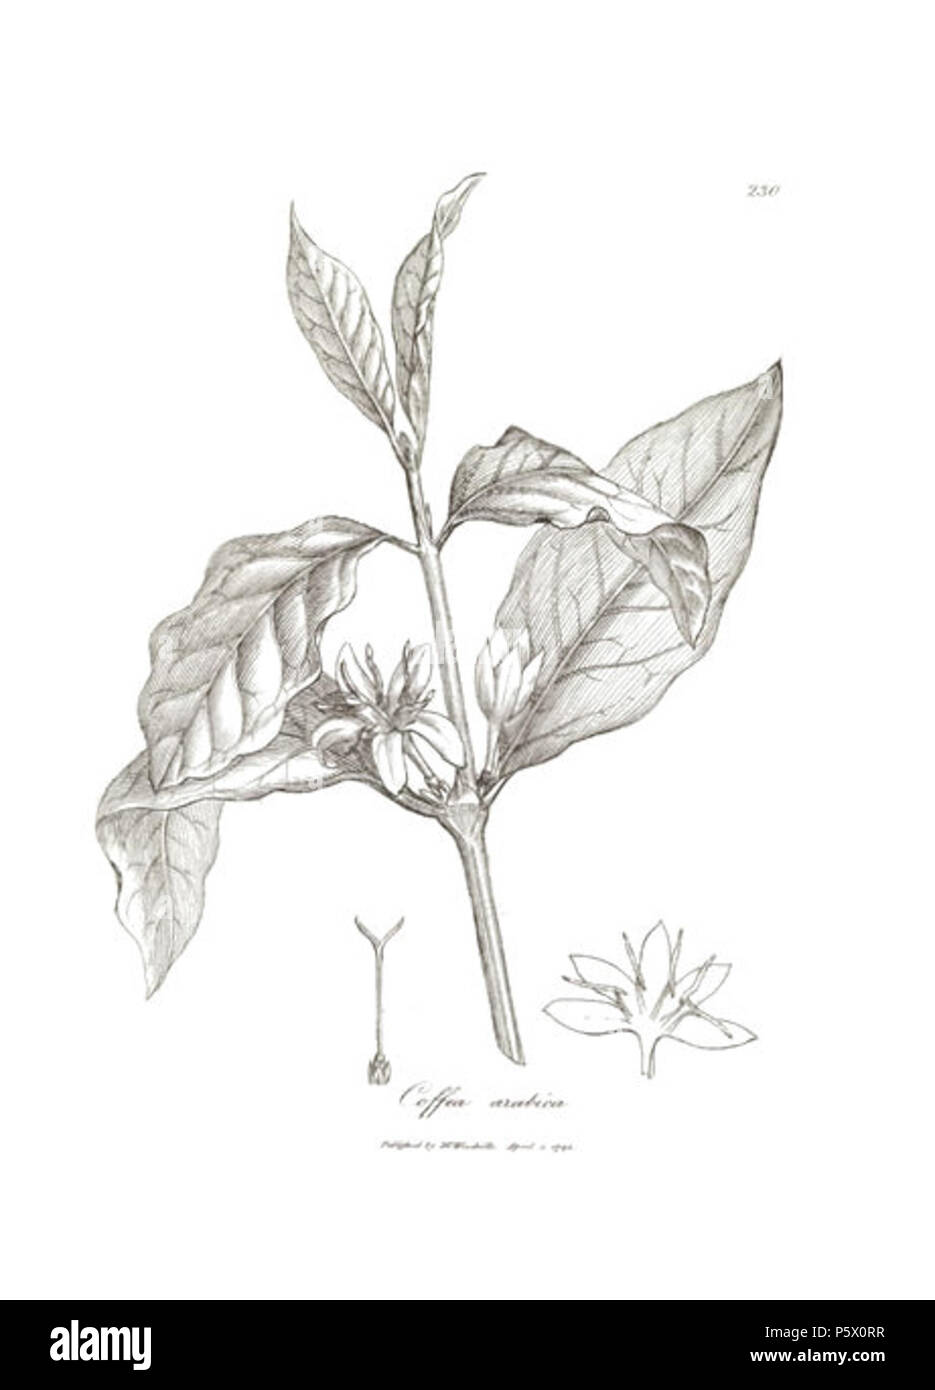 N/A. Illustration of Coffea arabica 230 (Coffea arabica L., Arabian coffee) from A supplement to Medical botany, or, Part the second : containing plates with descriptions of most of the principal medicinal plants not included in the materia medica of the collegiate pharmacopoeias of London and Edinburgh : accompanied with a circumstantial detail of their medicinal effects, and of the diseases in which they have been successfully employed by William Woodville . 1794. James Phillips 364 Coffea arabica 230-RGB Stock Photo